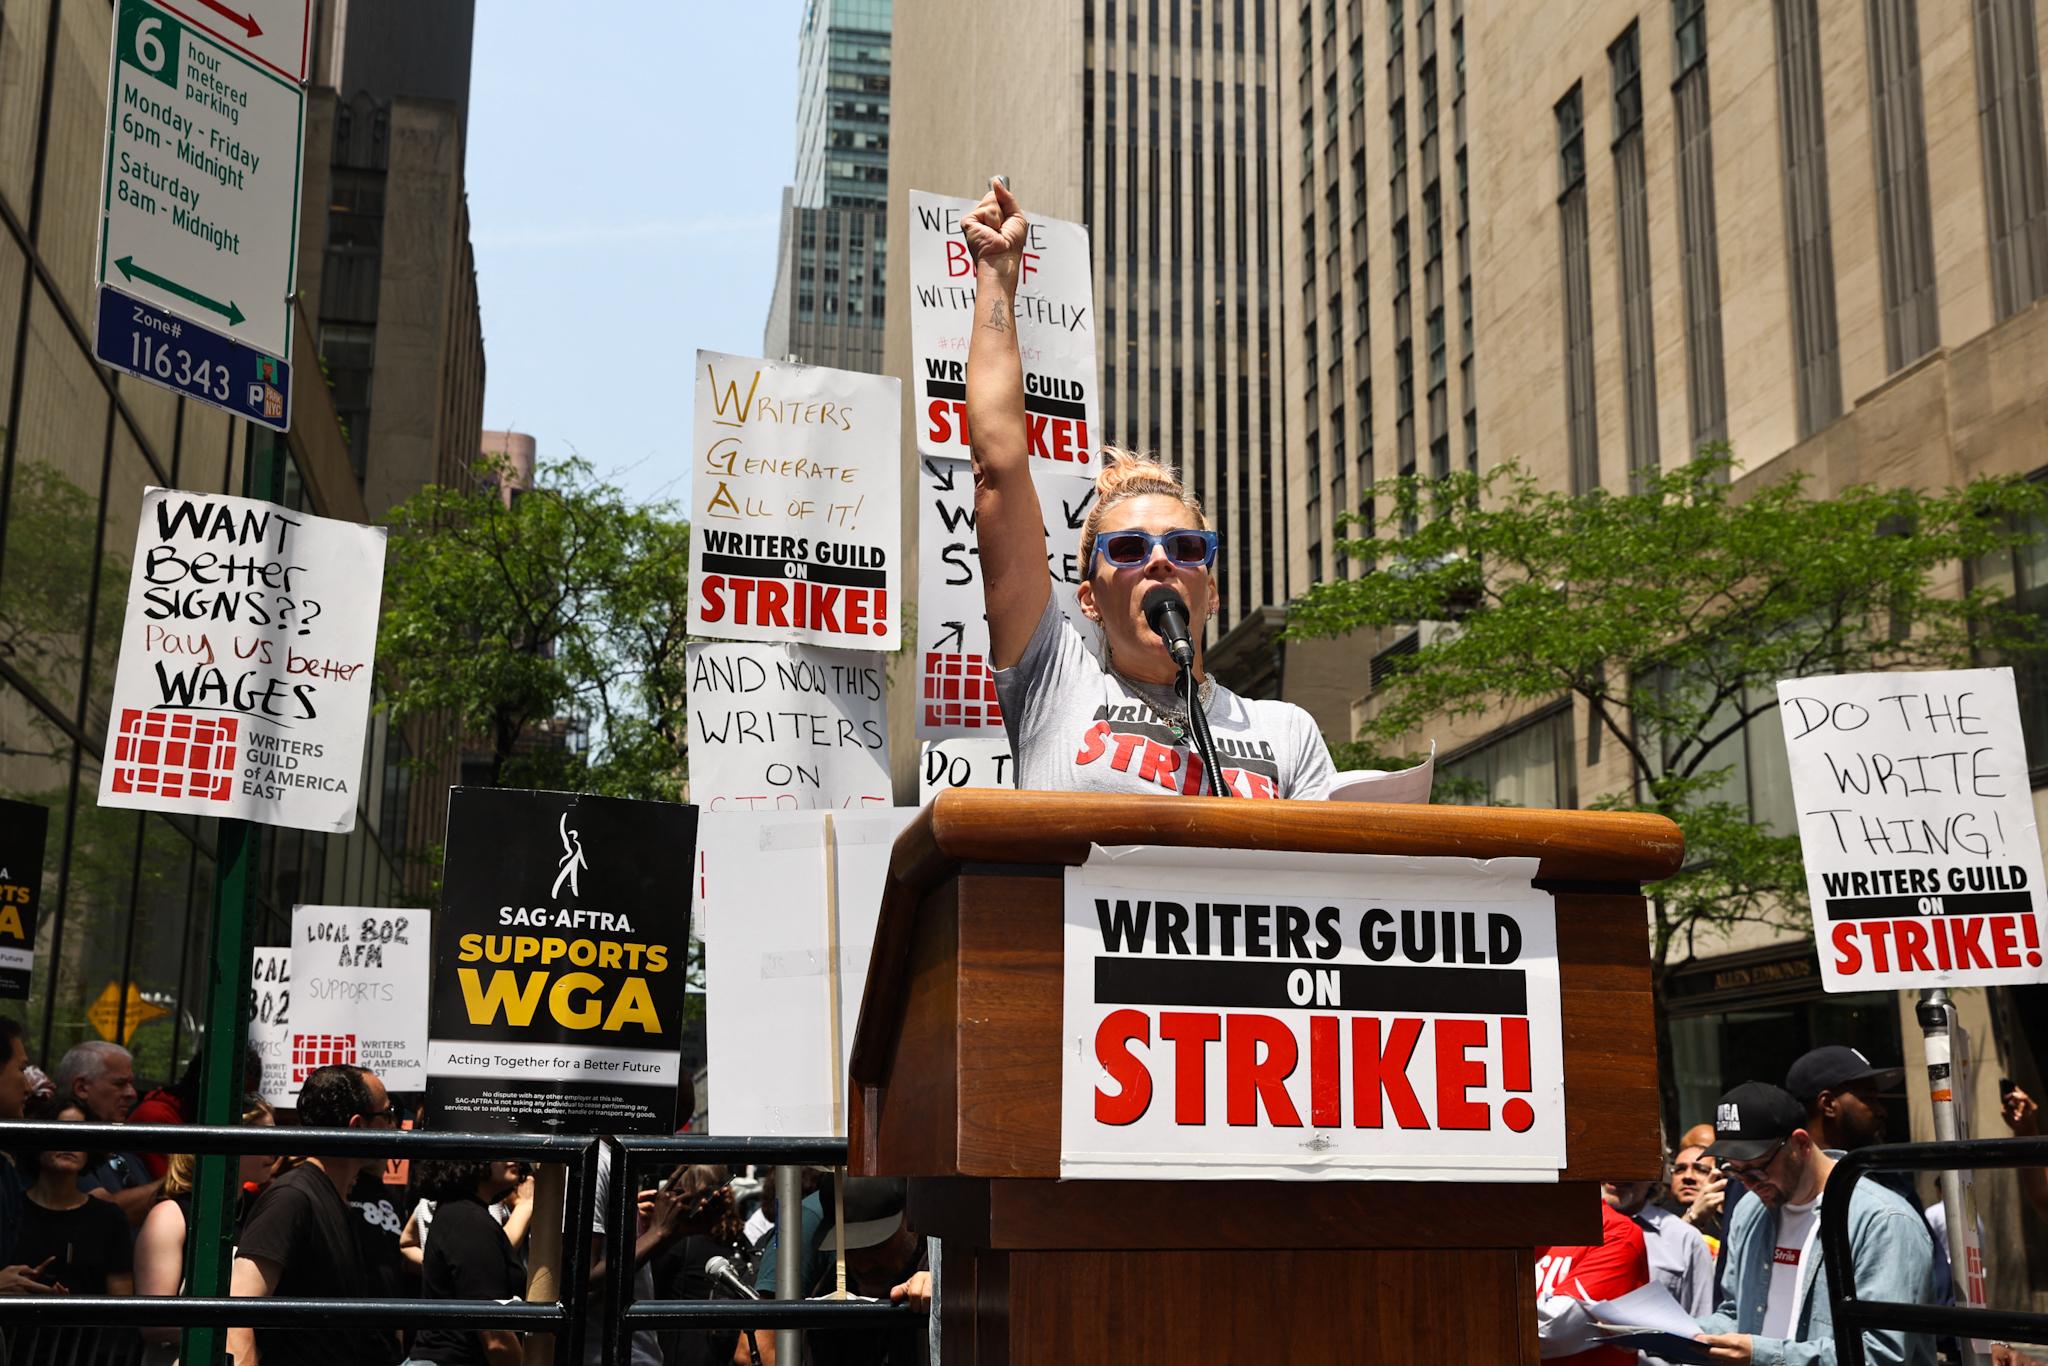 Actress Busy Phillips seen giving a speech at the WGA Writers Strike today in Rockefeller Center in New York City